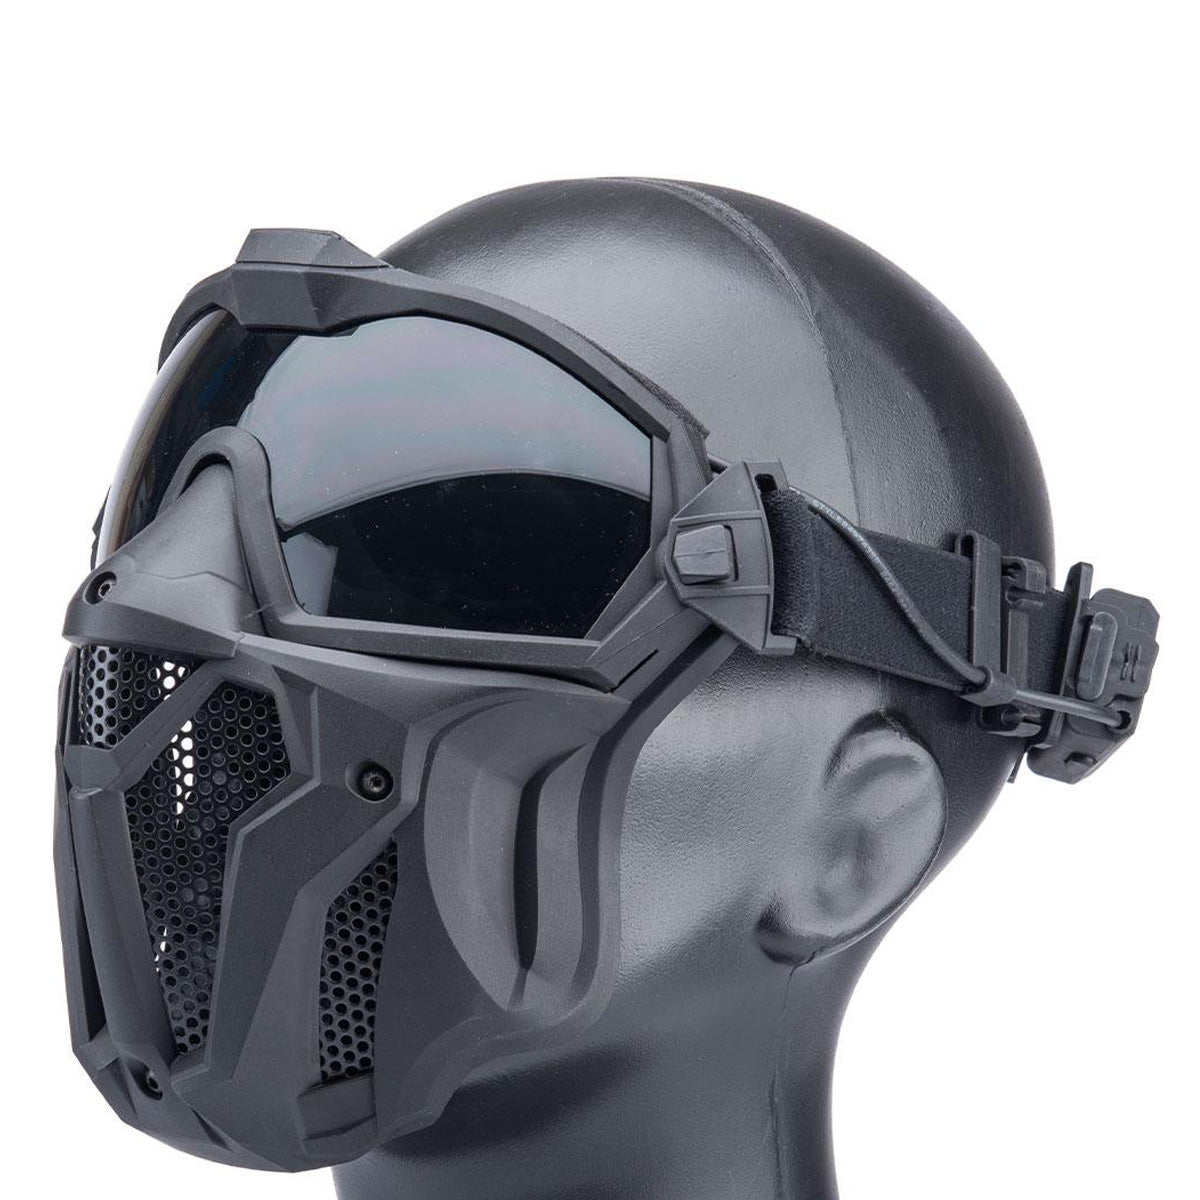 WOSPORT TACTICAL AIRSOFT FULL FACE MASK ANTI-FOG GOGGLES